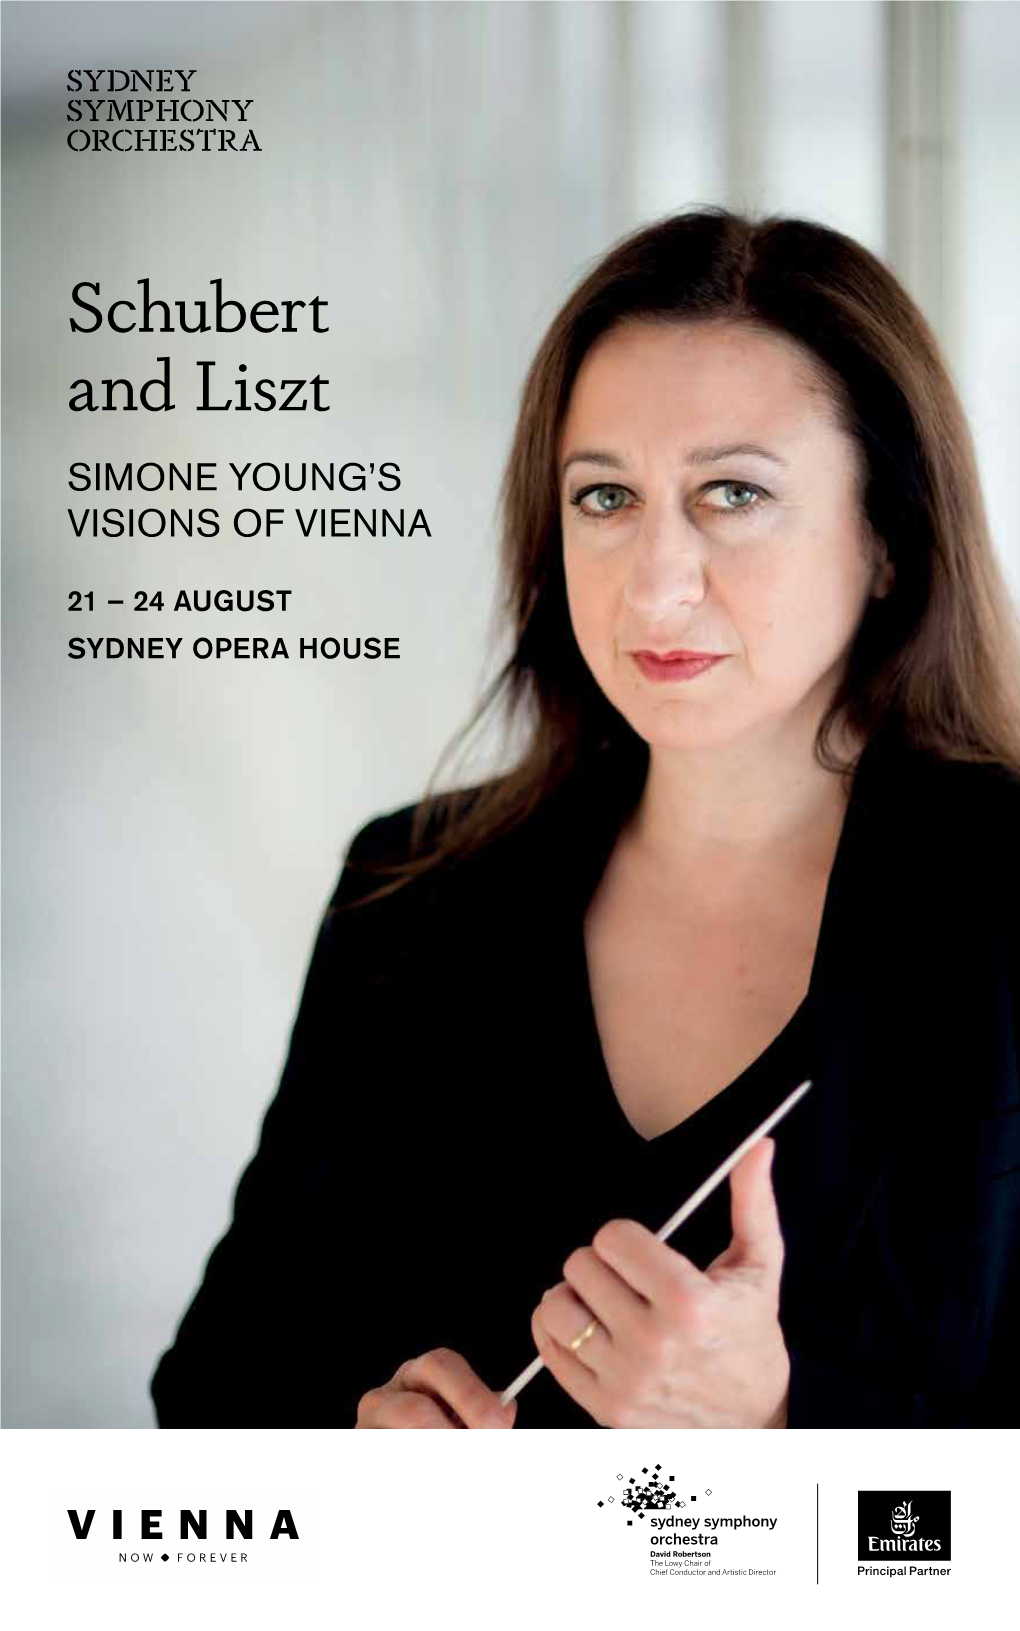 Schubert and Liszt SIMONE YOUNG’S VISIONS of VIENNA